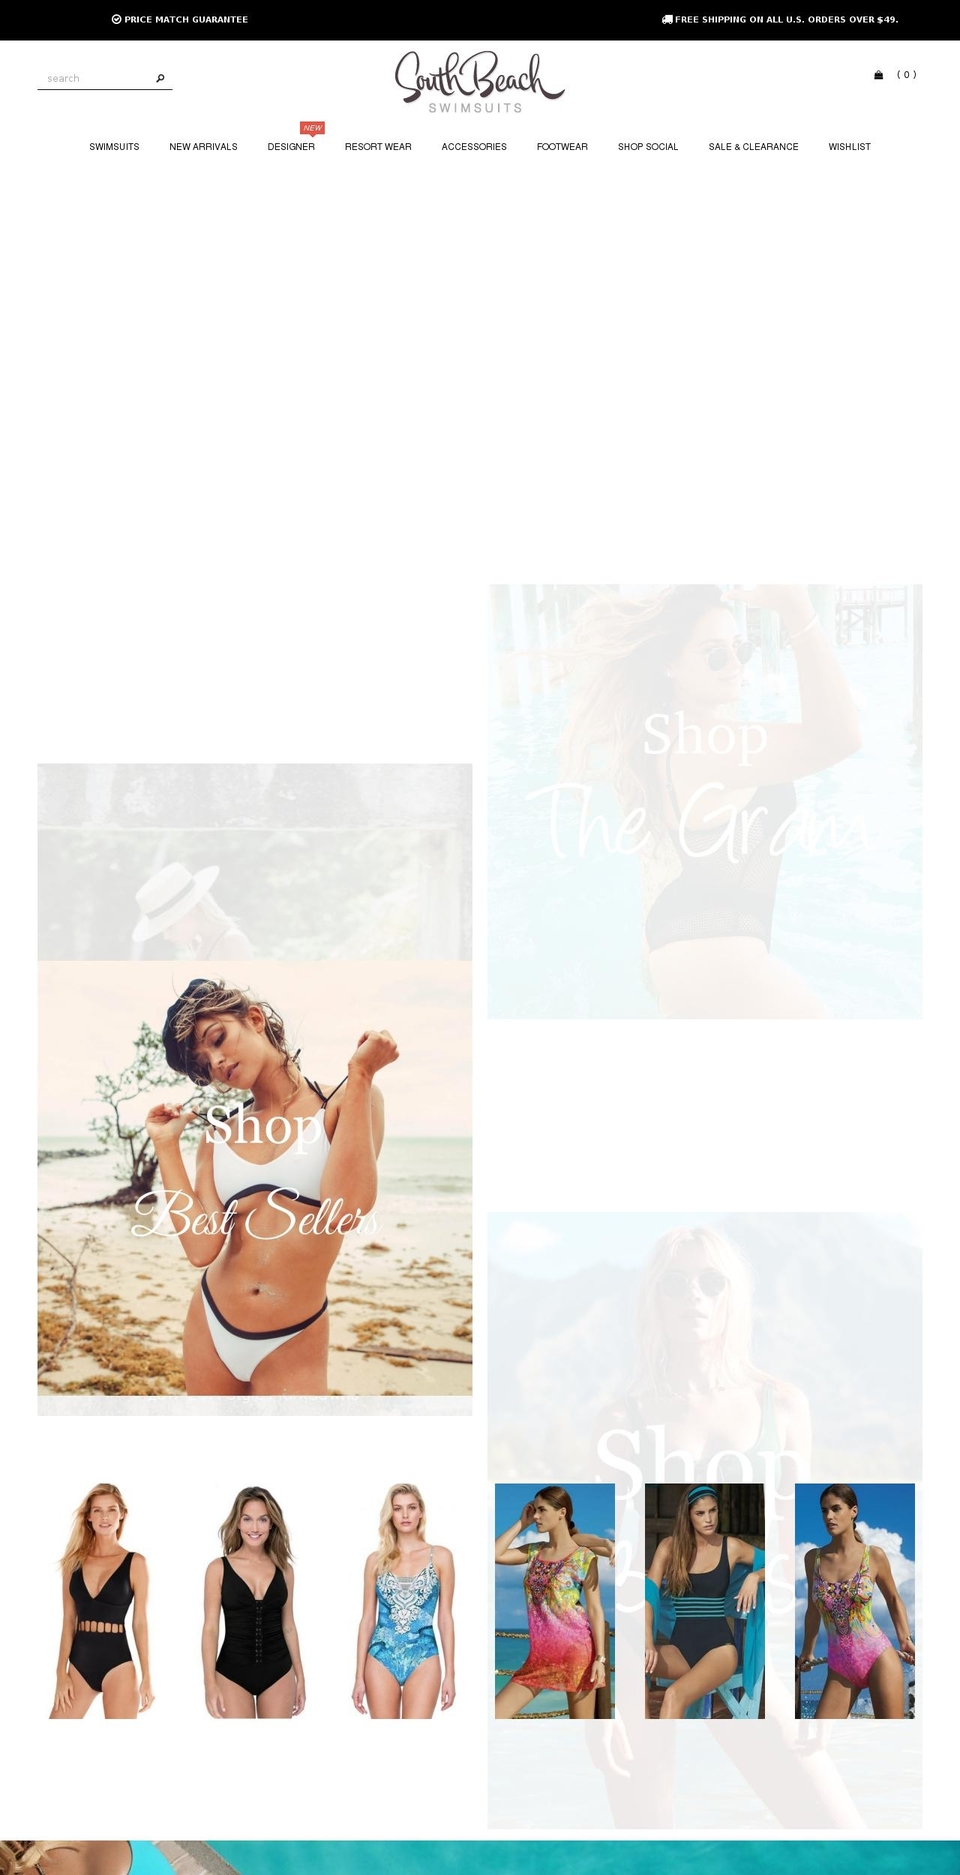 Made With ❤ By Minion Made - Updated Checkout Shopify theme site example swimwearack.com